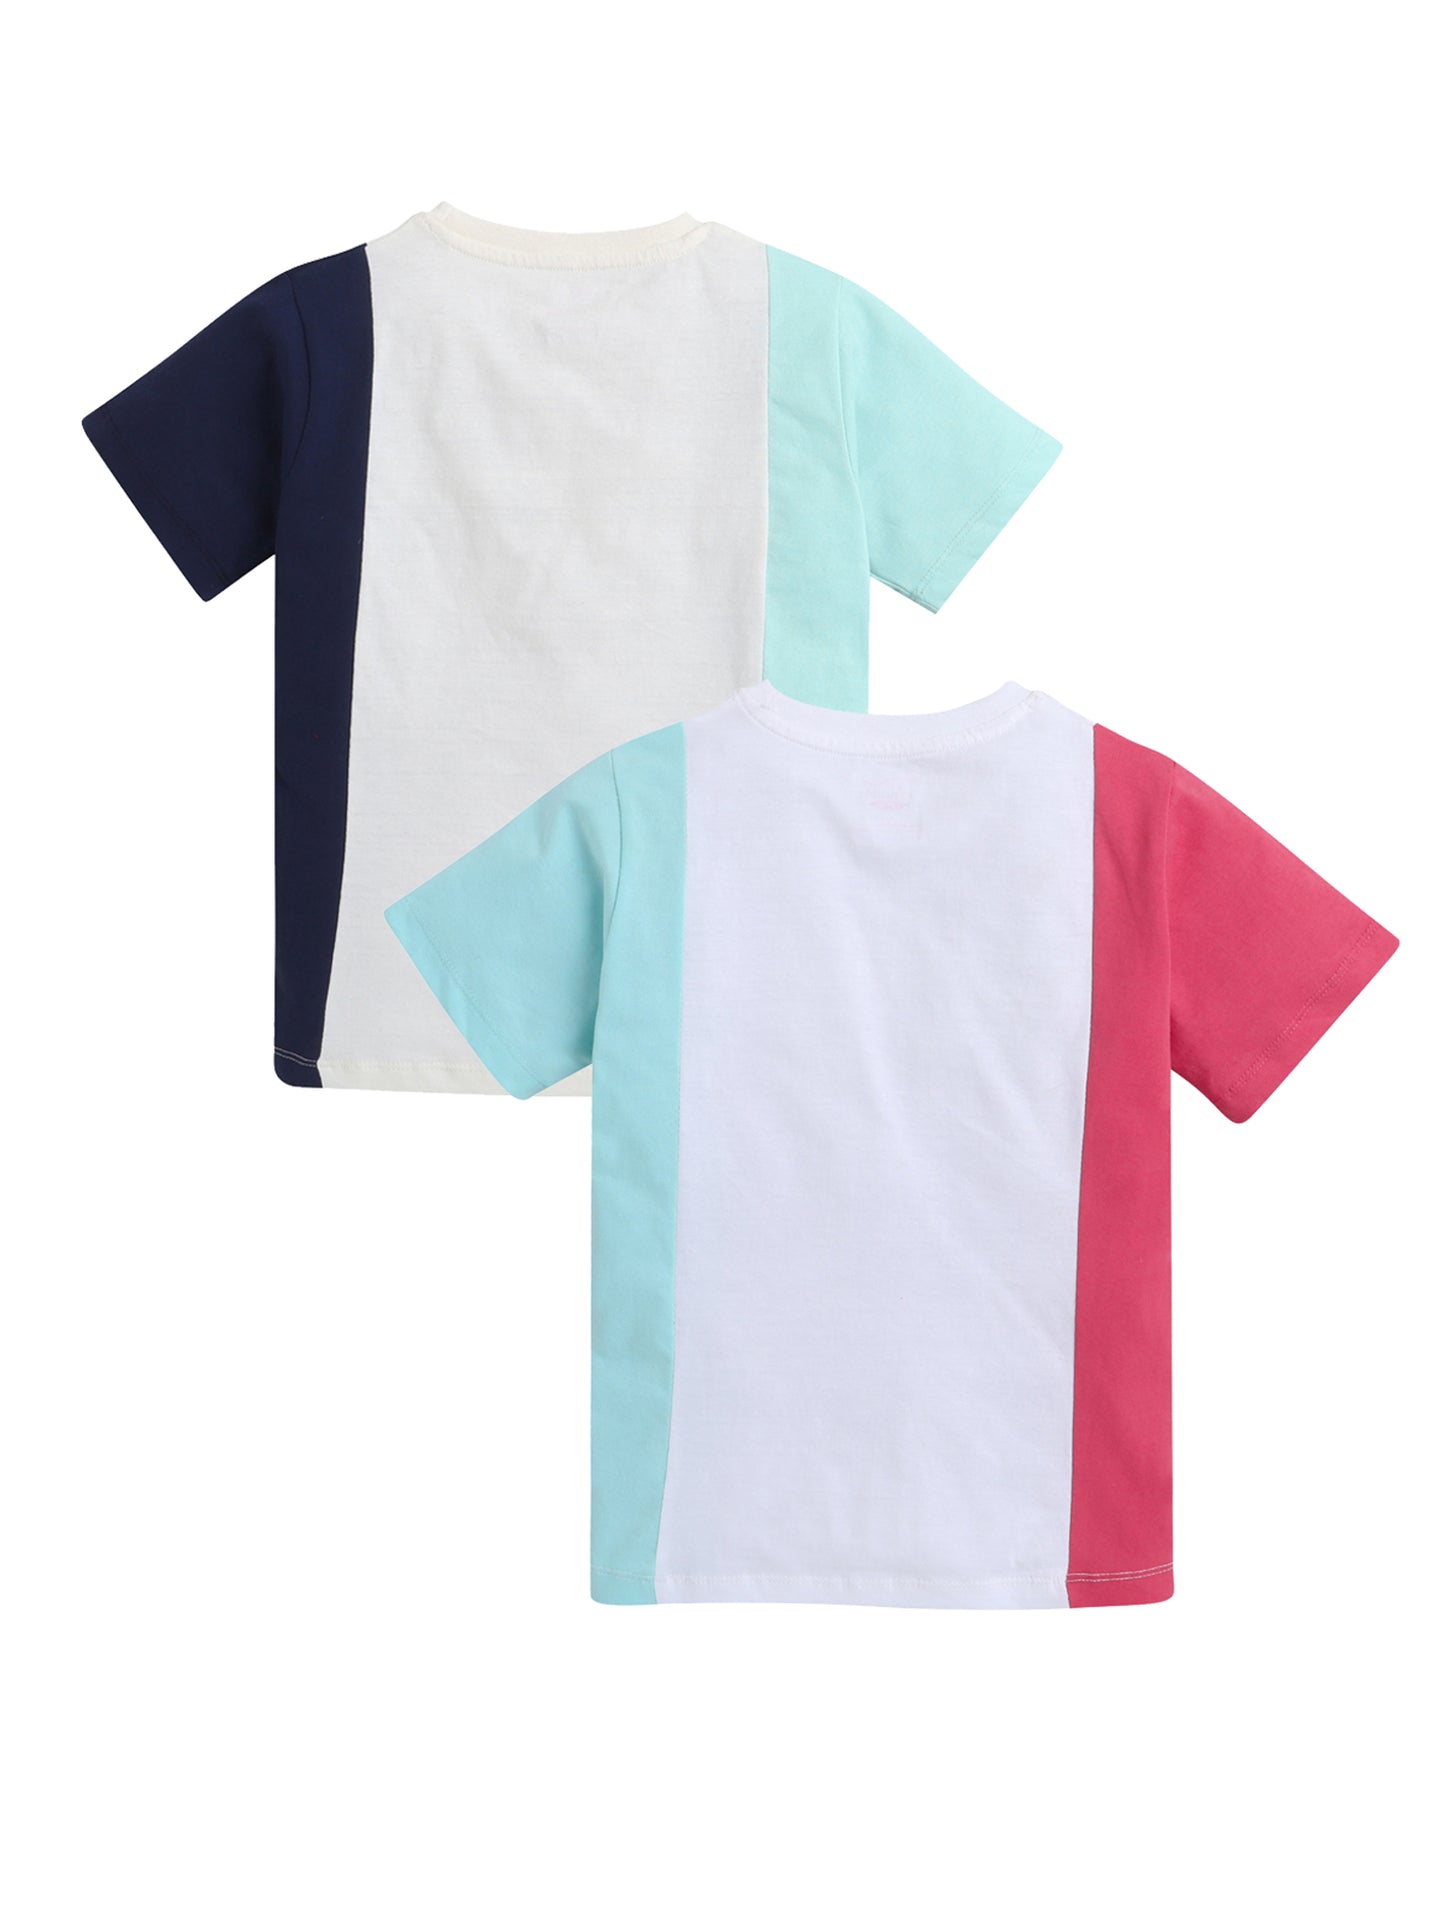 Pack of 2 Unisex Cotton T-shirts in Assorted Colors - 6 to 8 Years